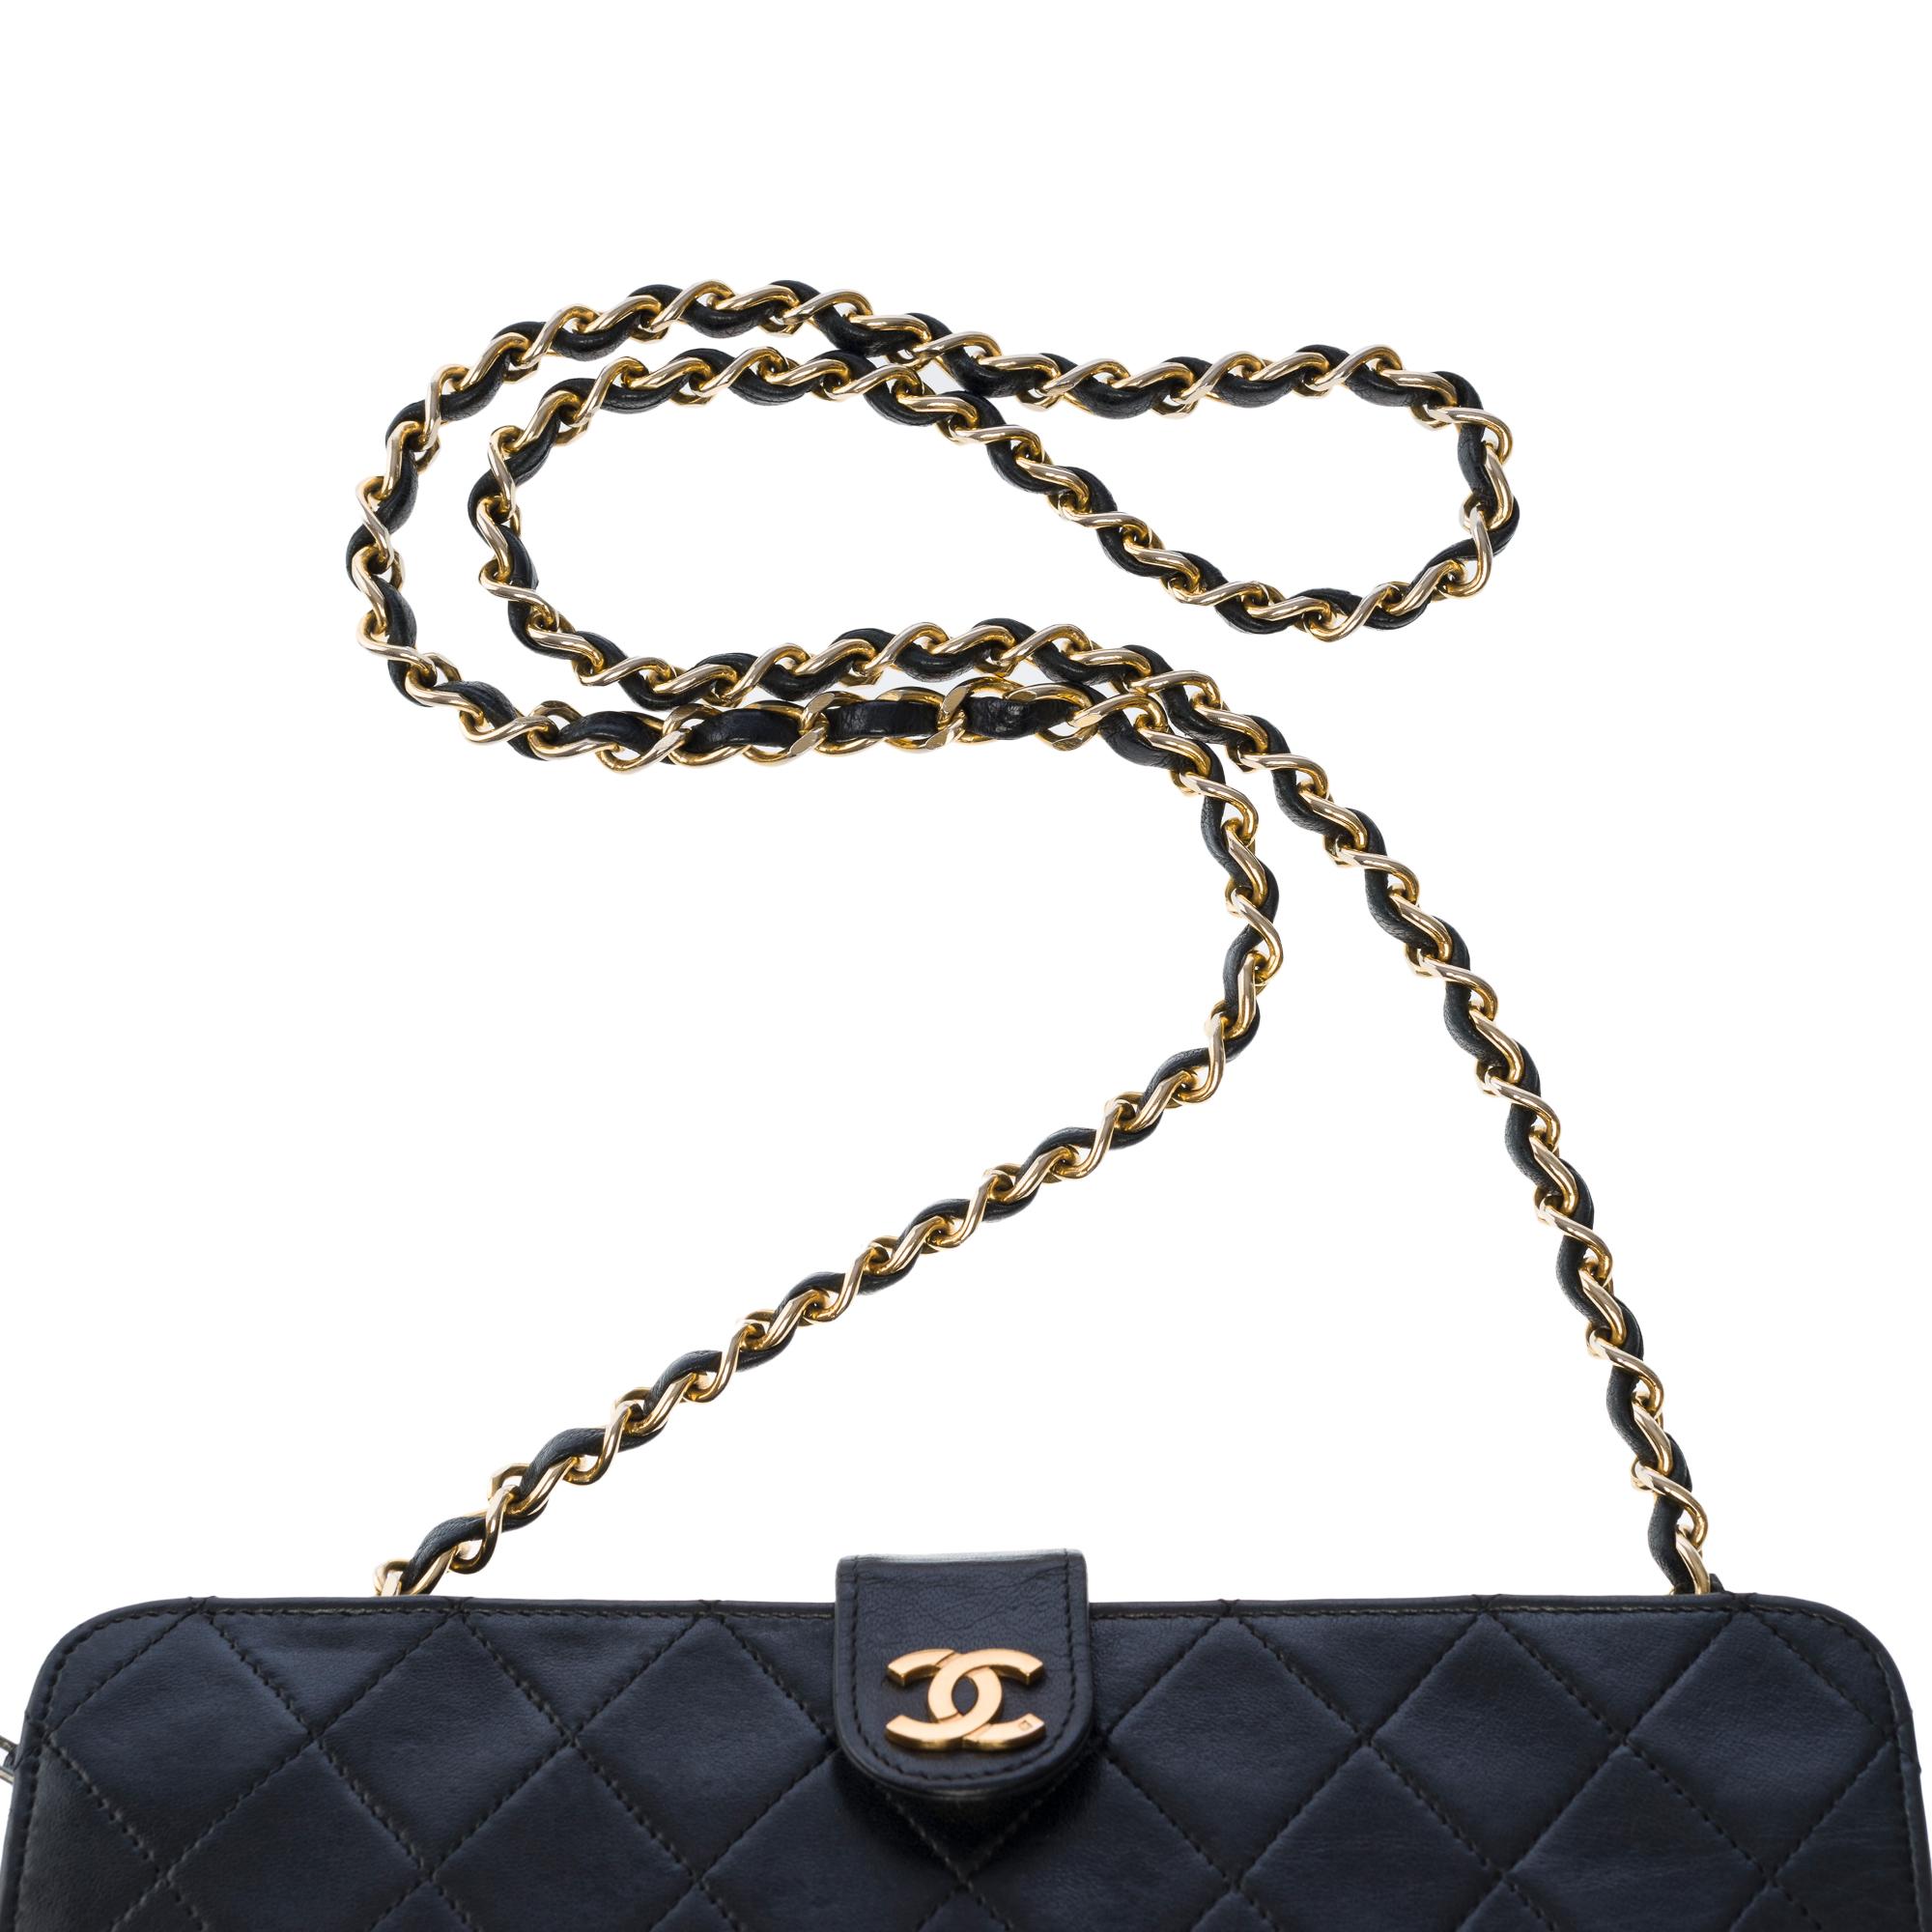 Gorgeous Chanel Classic vintage shoulder bag in black lambskin leather, GHW 5